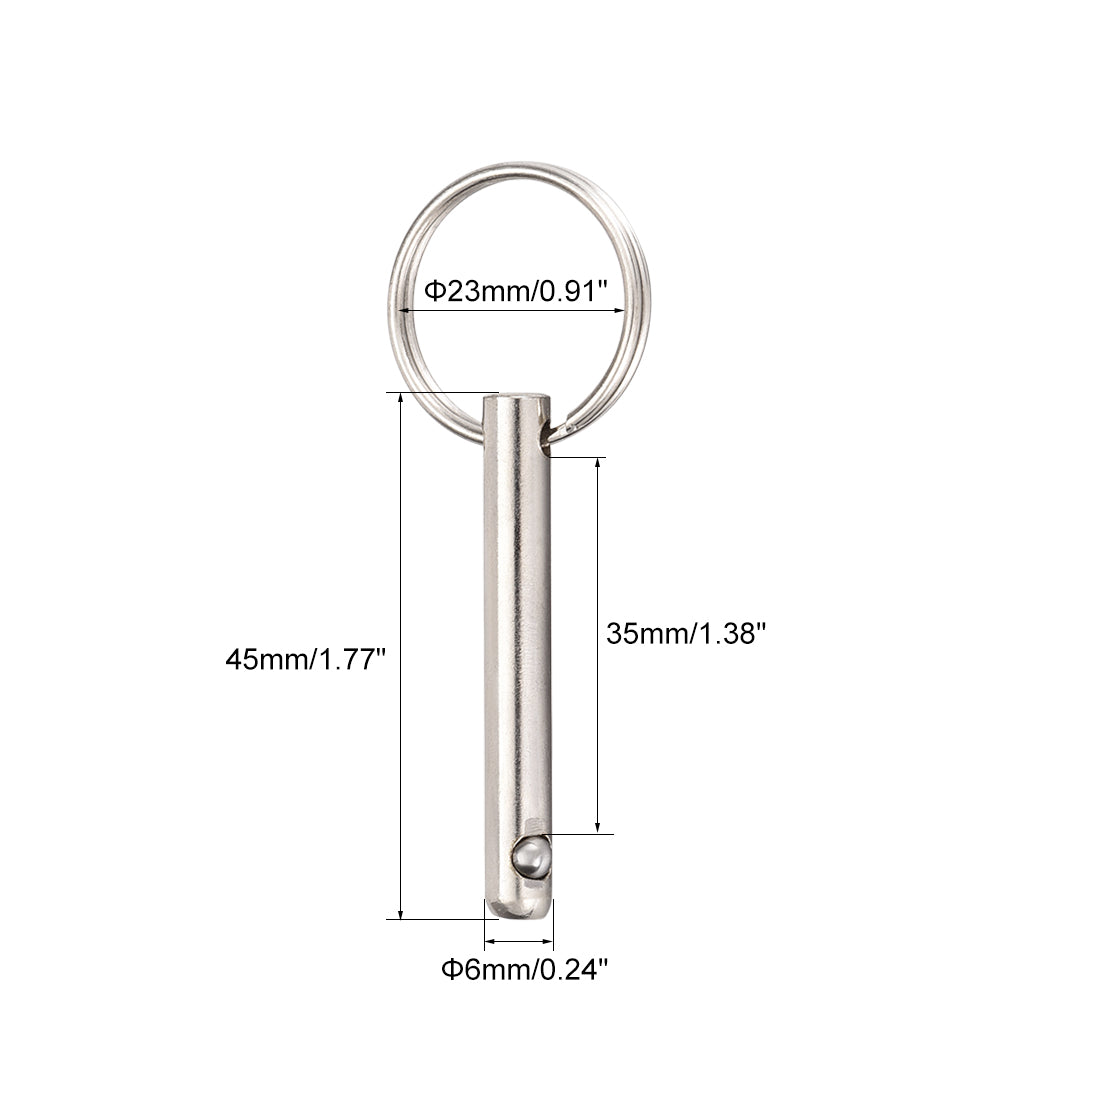 Uxcell Uxcell Quick Release Pin 8mmX70mm Marine Hardware for Boat Bimini Top Deck Hinge 4Pcs